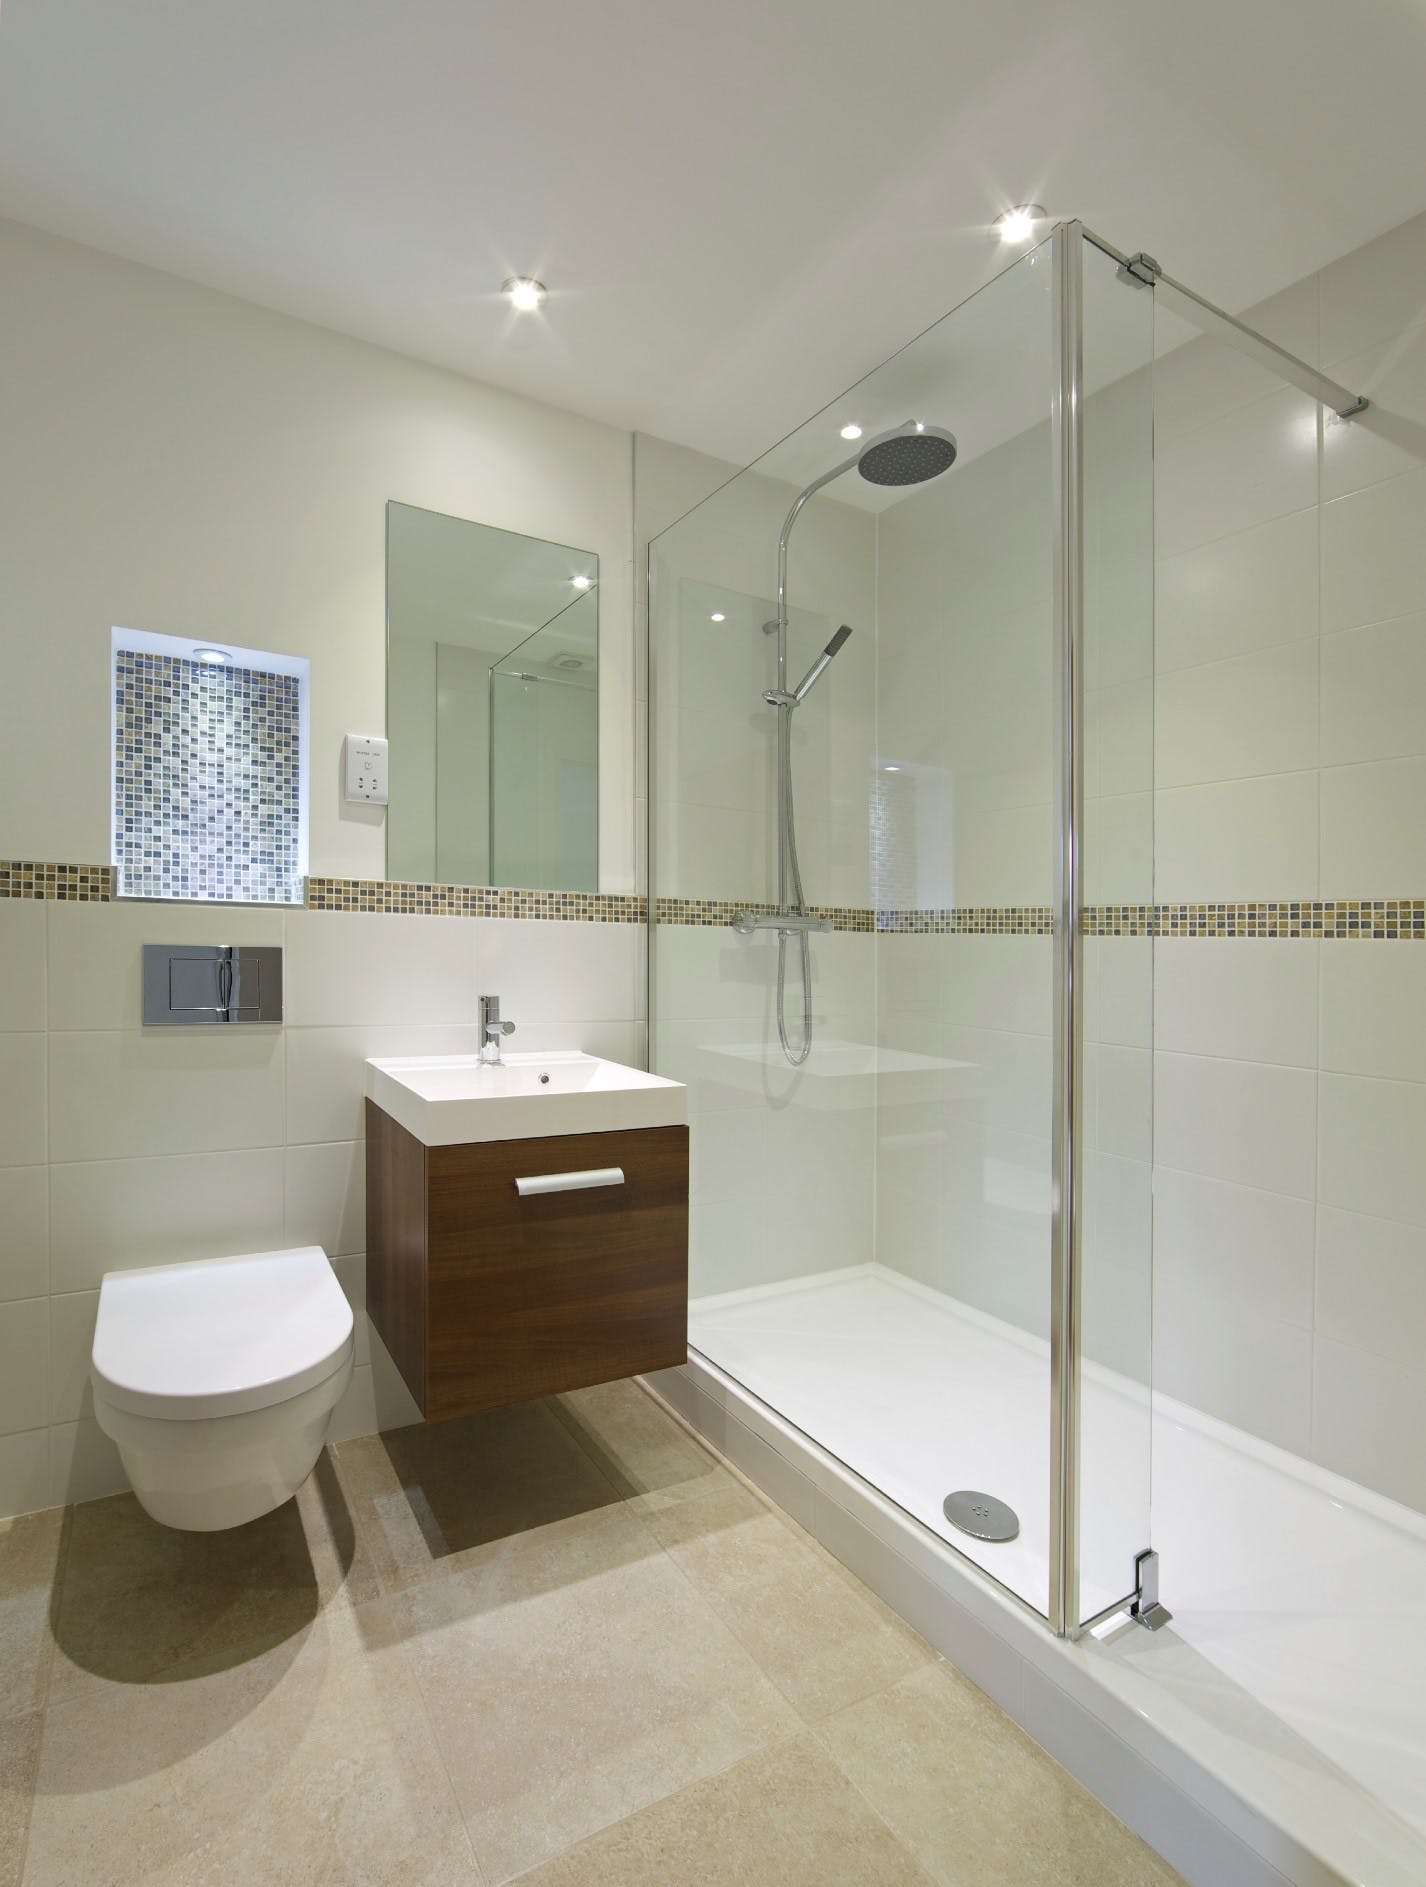 Shower Room Ideas & Small Shower Room Layout